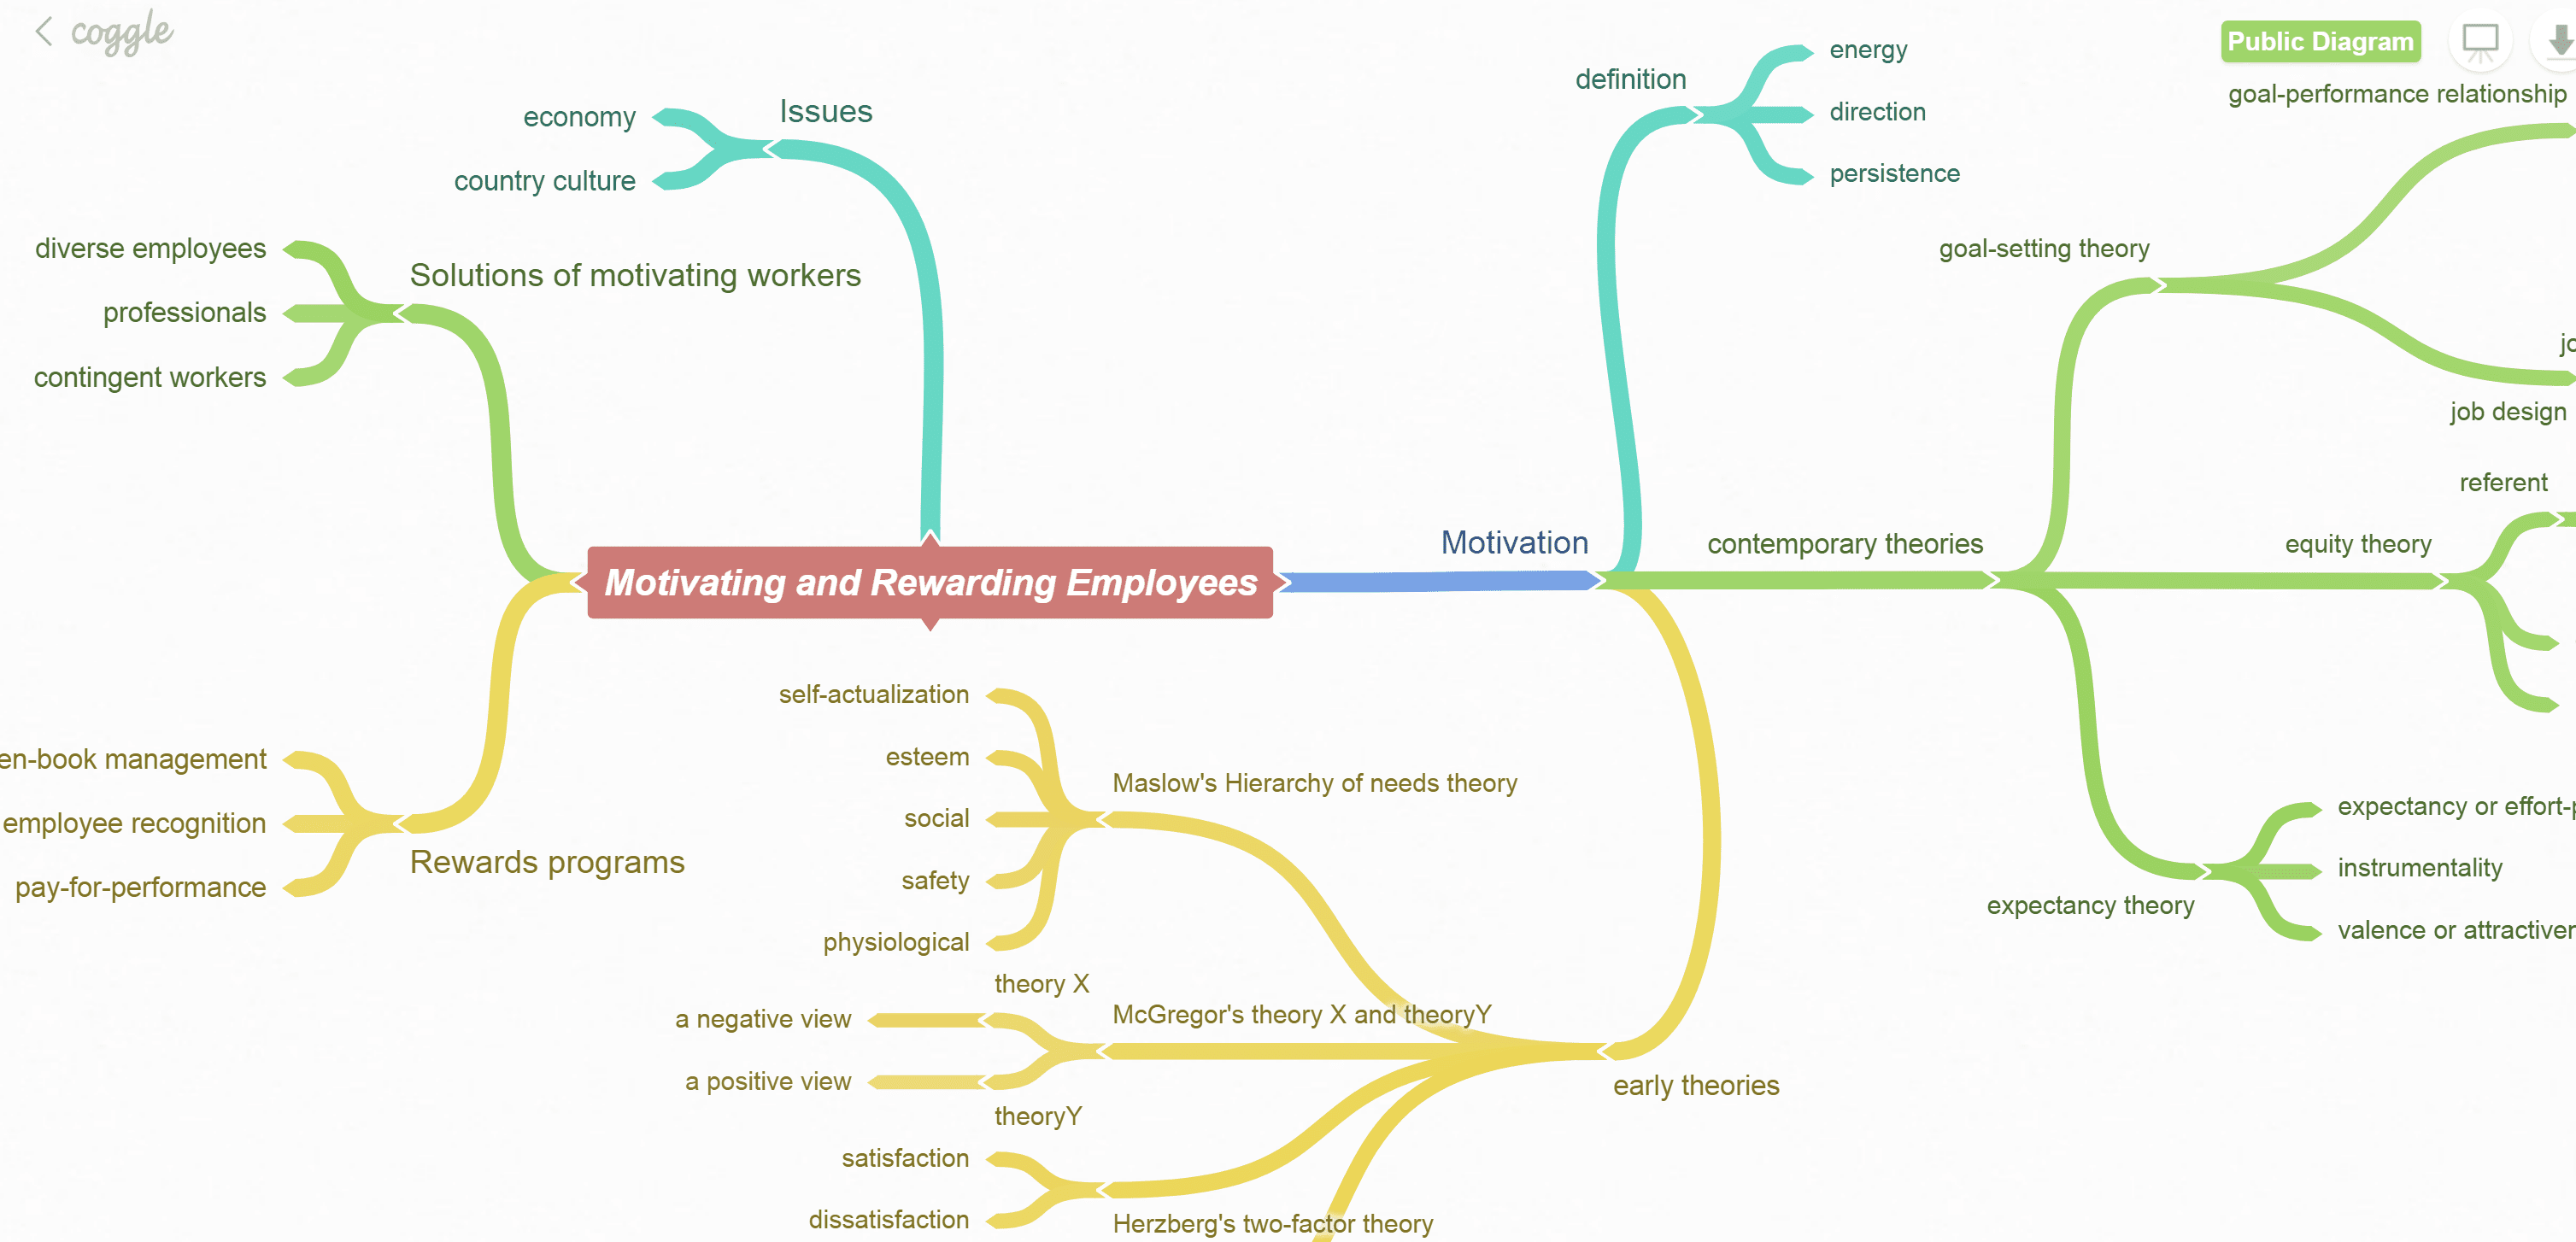 Open source mind map